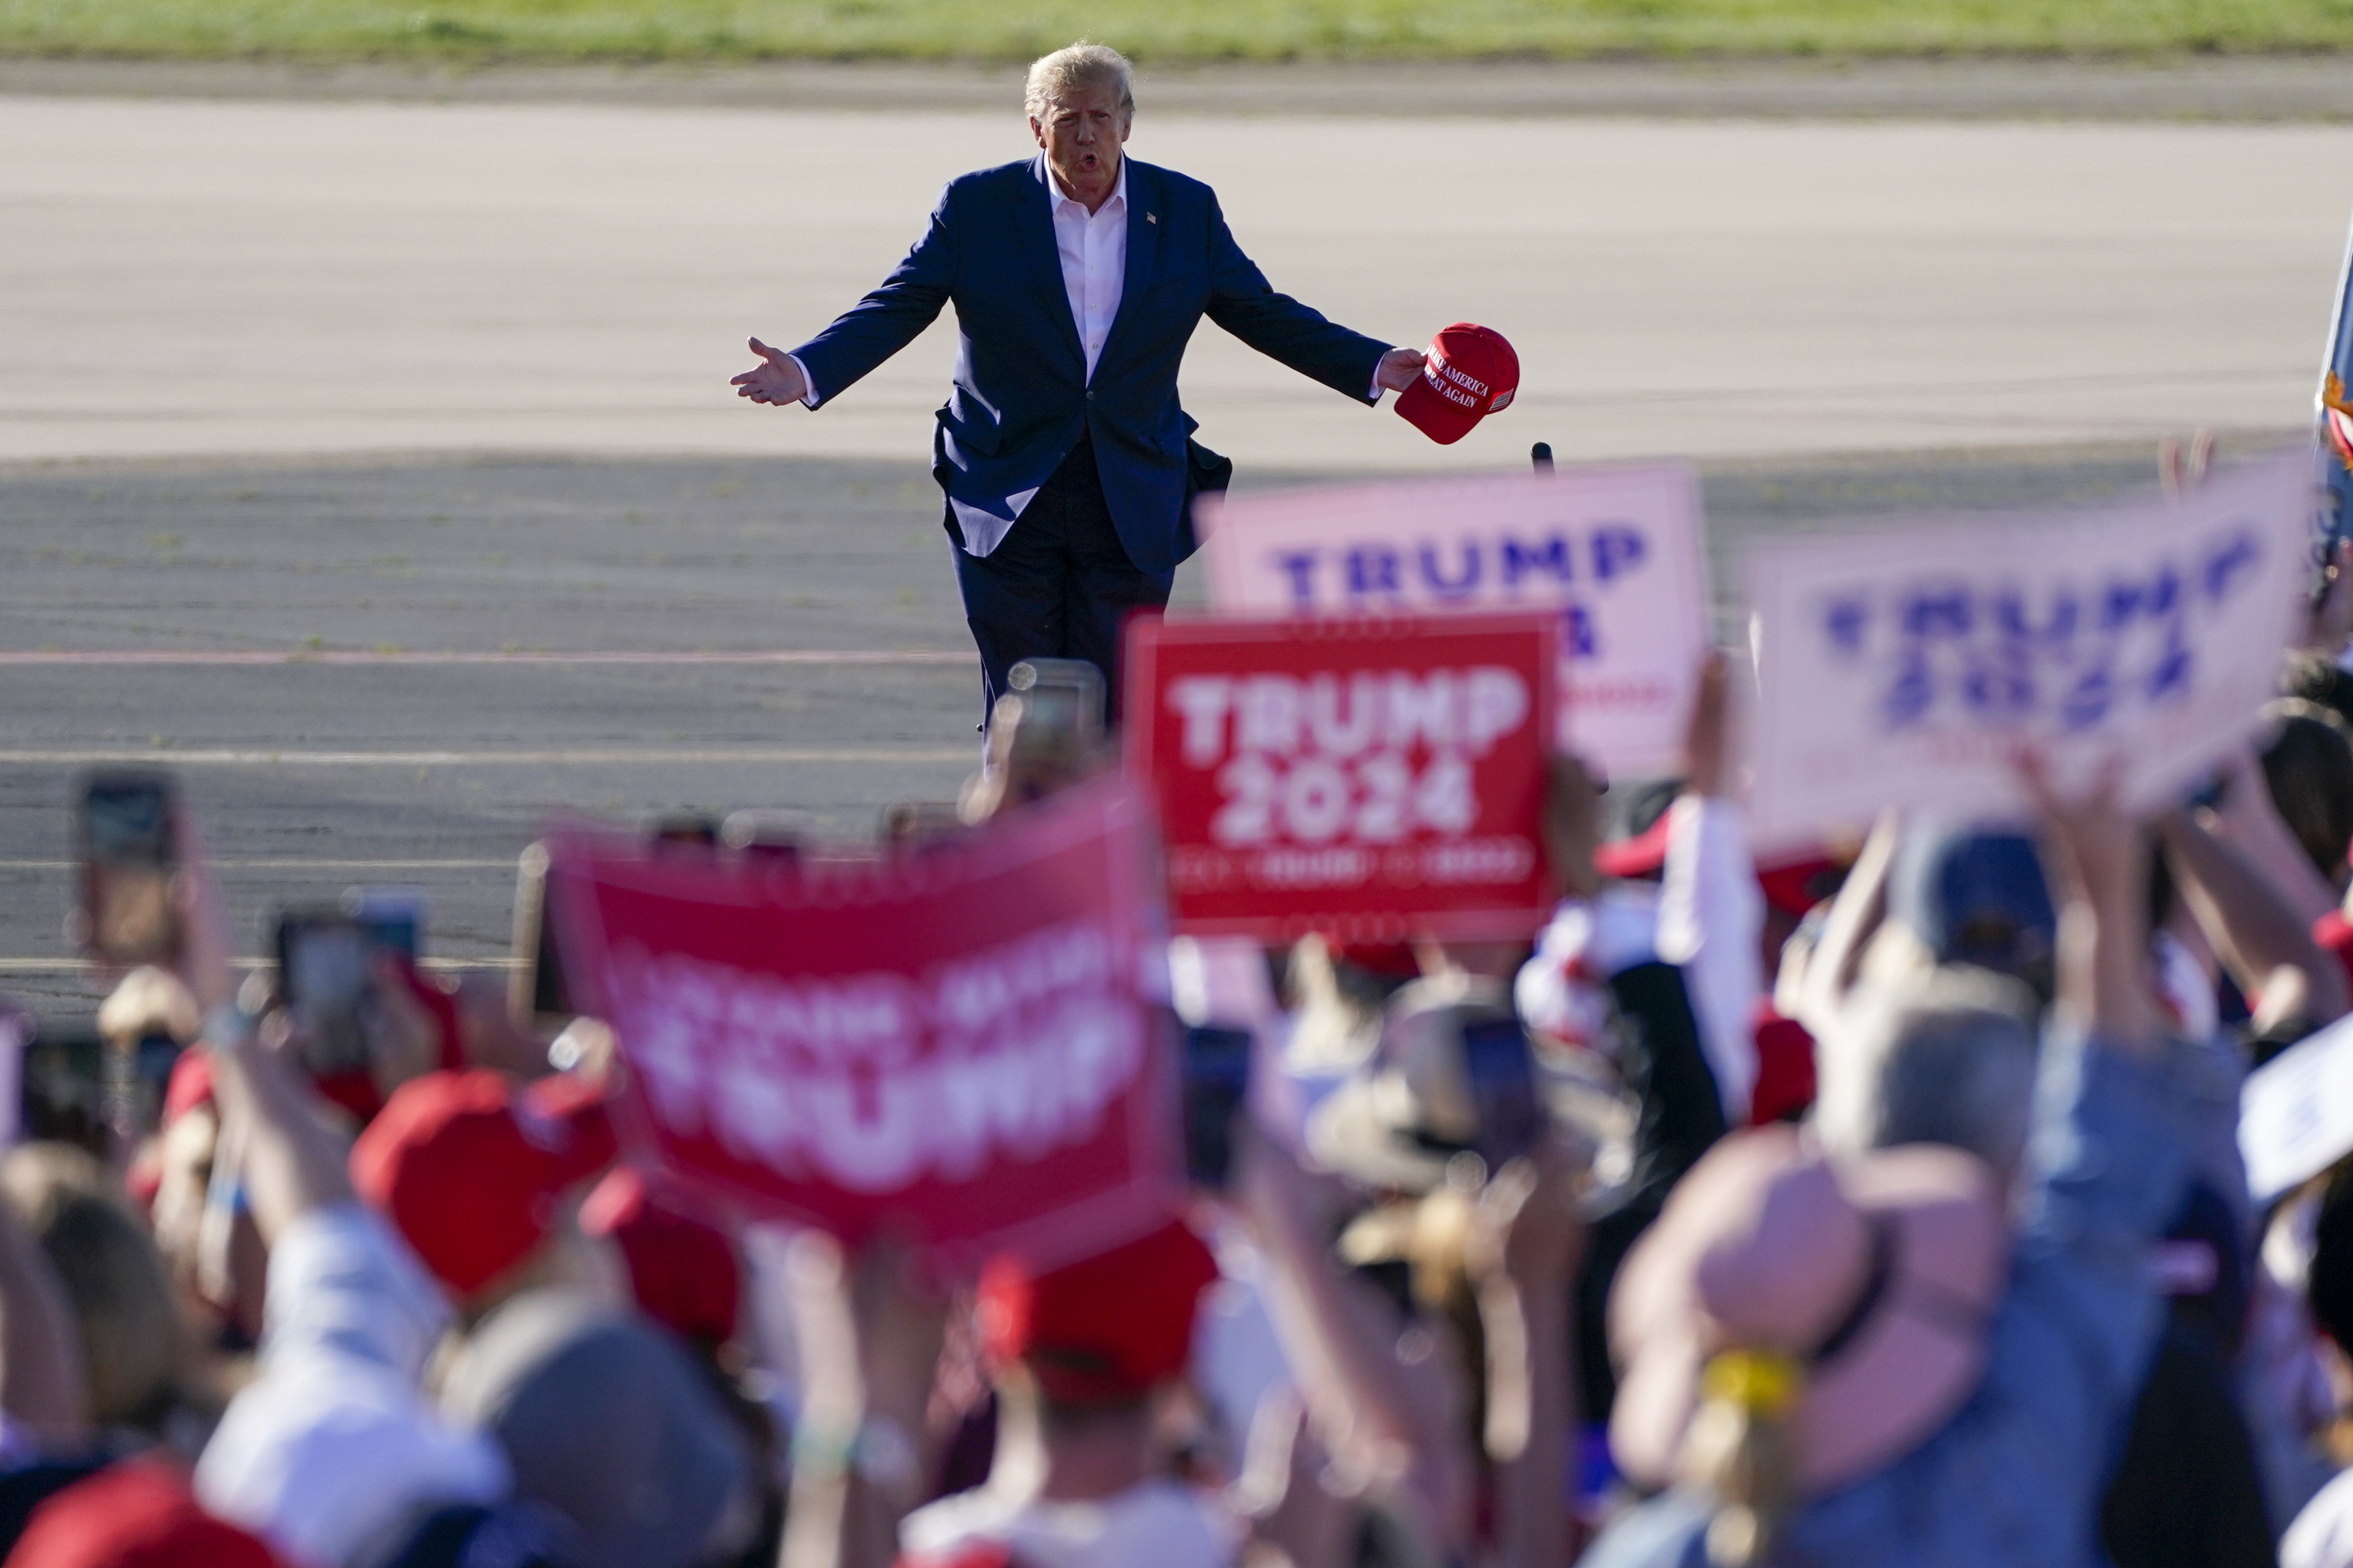 Former President Donald Trump walks across the tarmac as he arrives to speak at a campaign rally at Waco Regional Airport Saturday, March 25, 2023, in Waco, Texas.